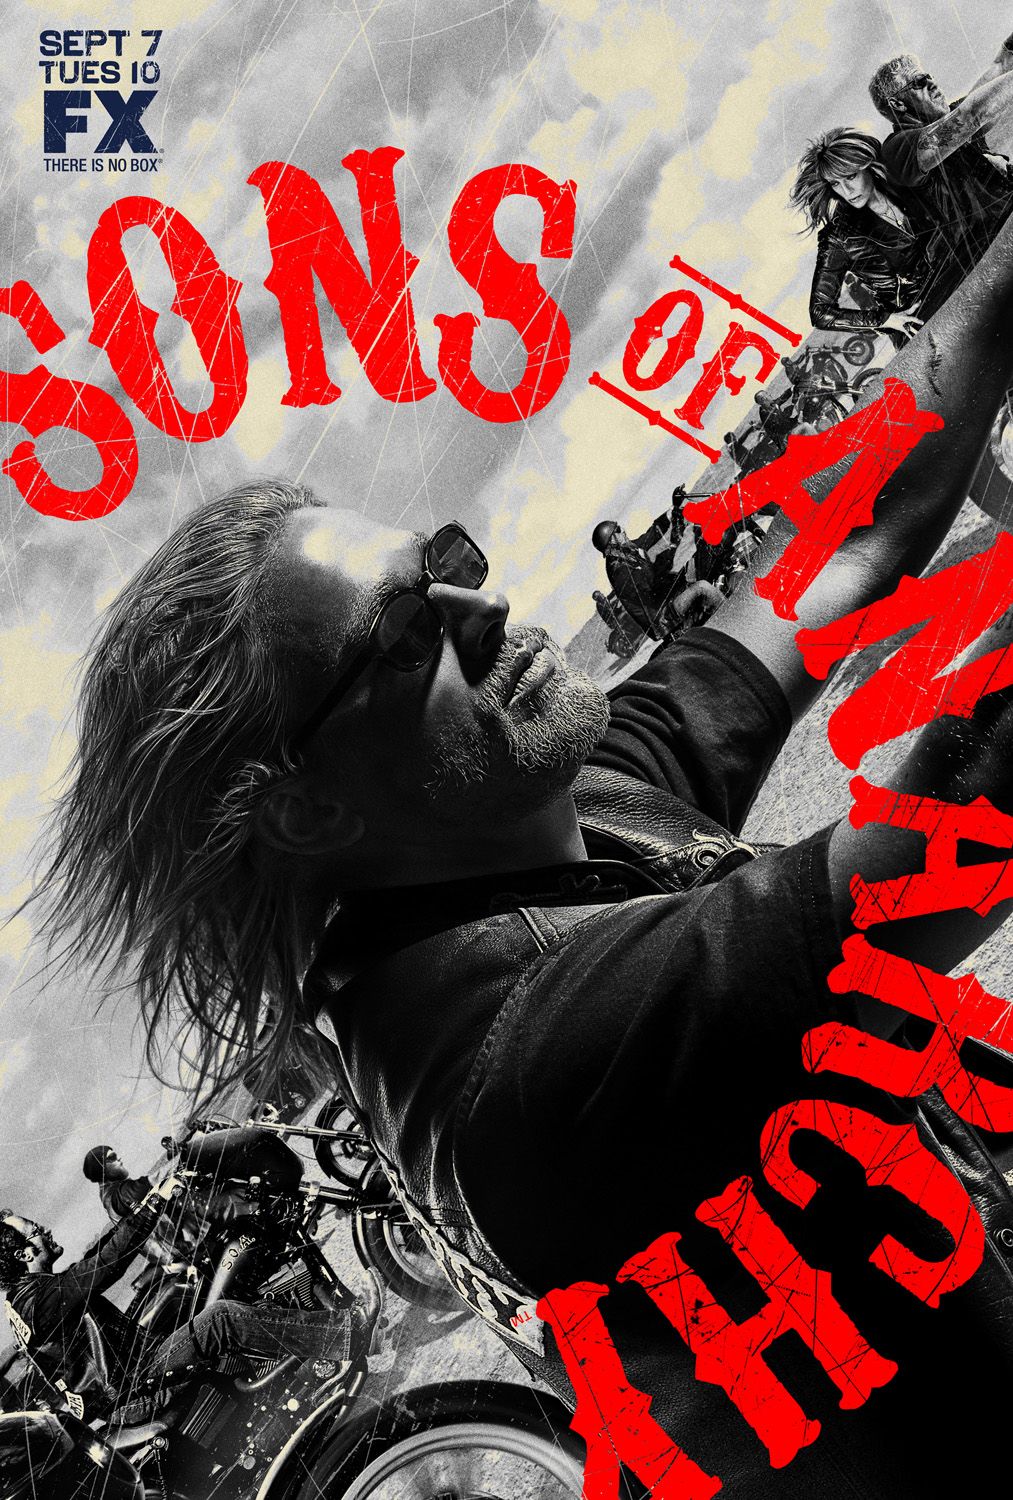 Sons of Anarchy-Staffel 6 (GERMAN.Subbed.HDTVRip.x264)